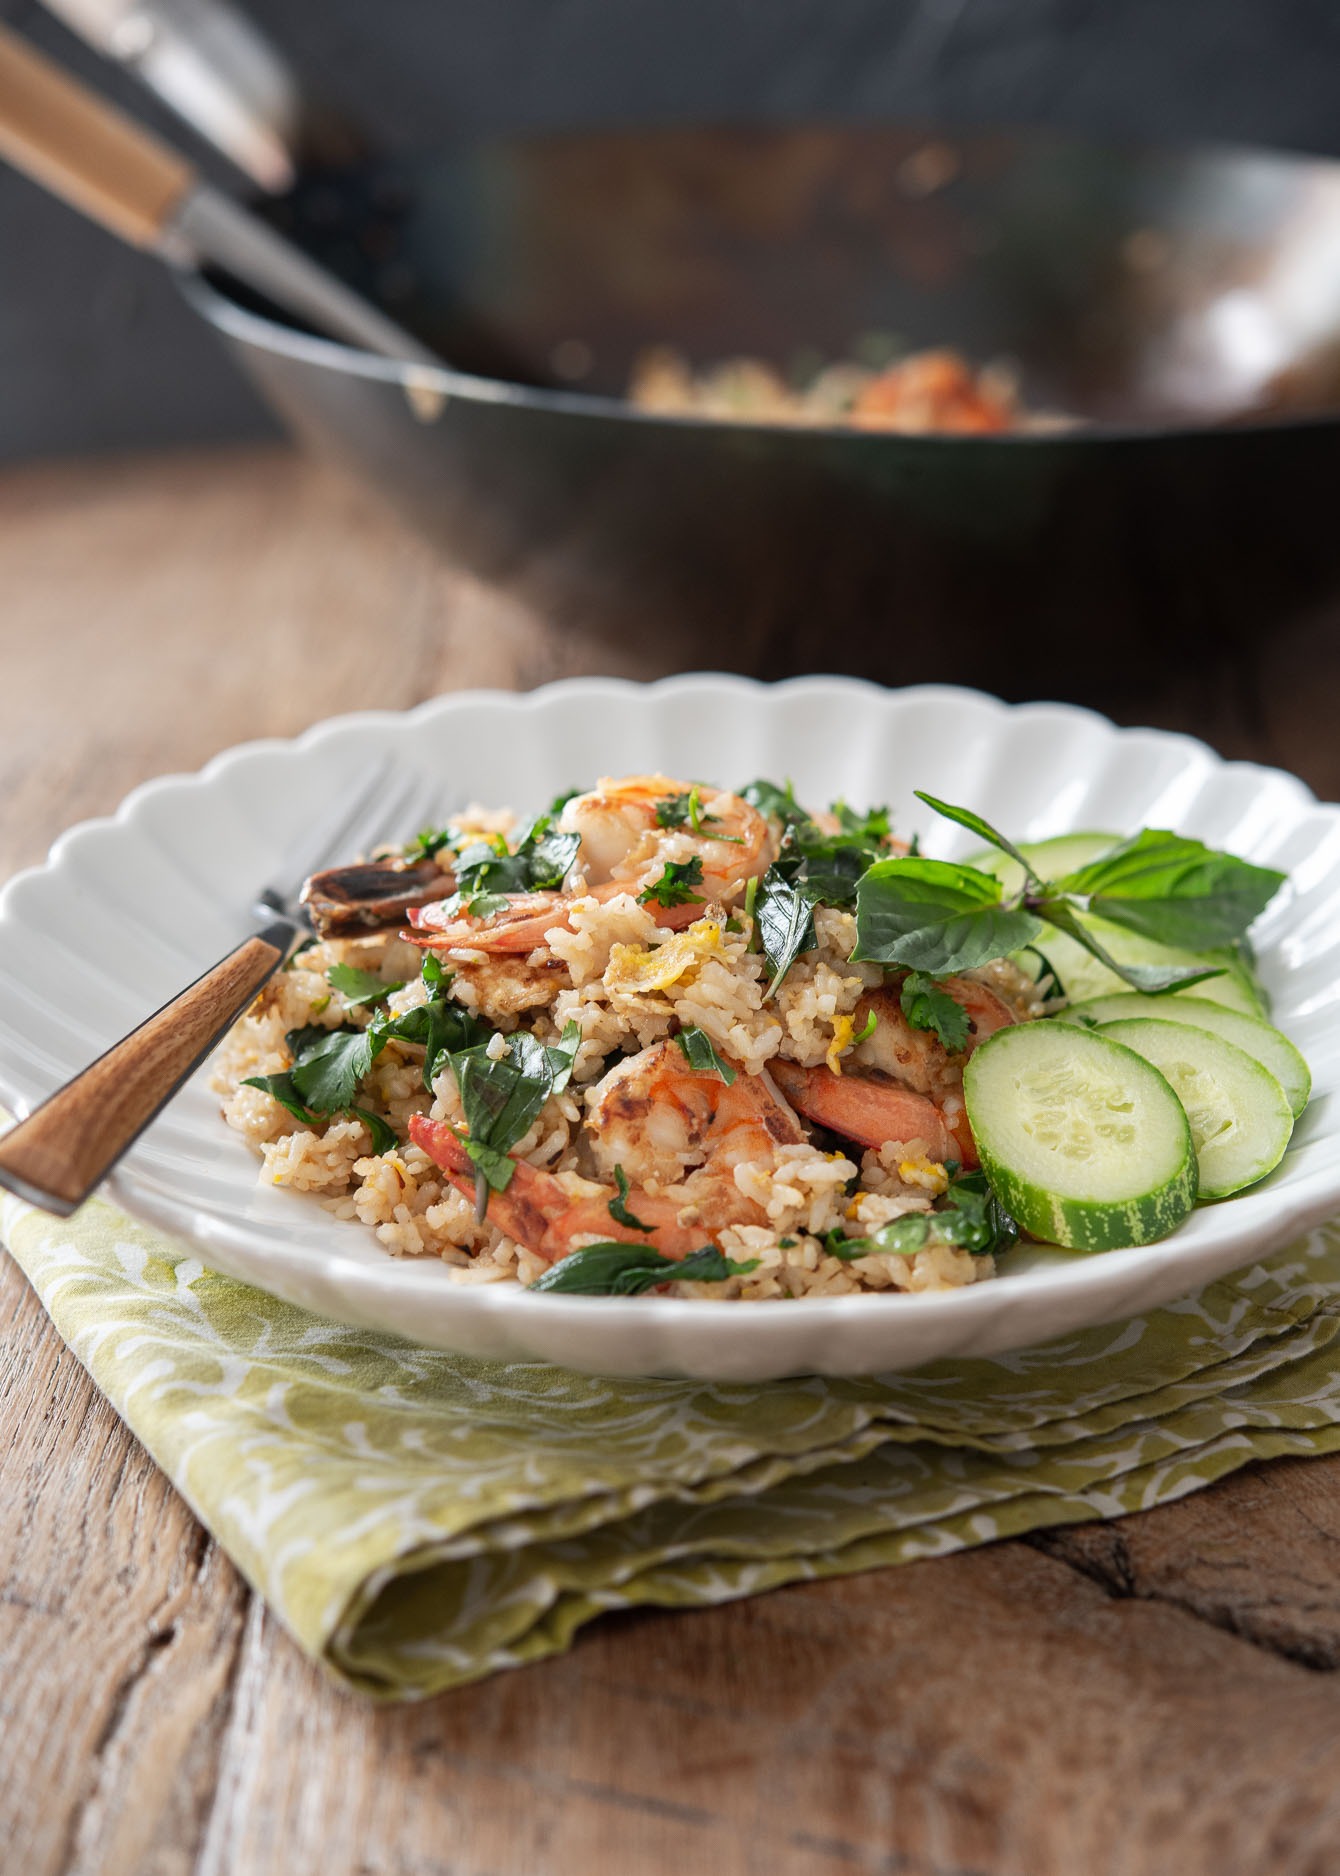 Thai basil fried rice with shrimp is served on a white plate with cucumber slices